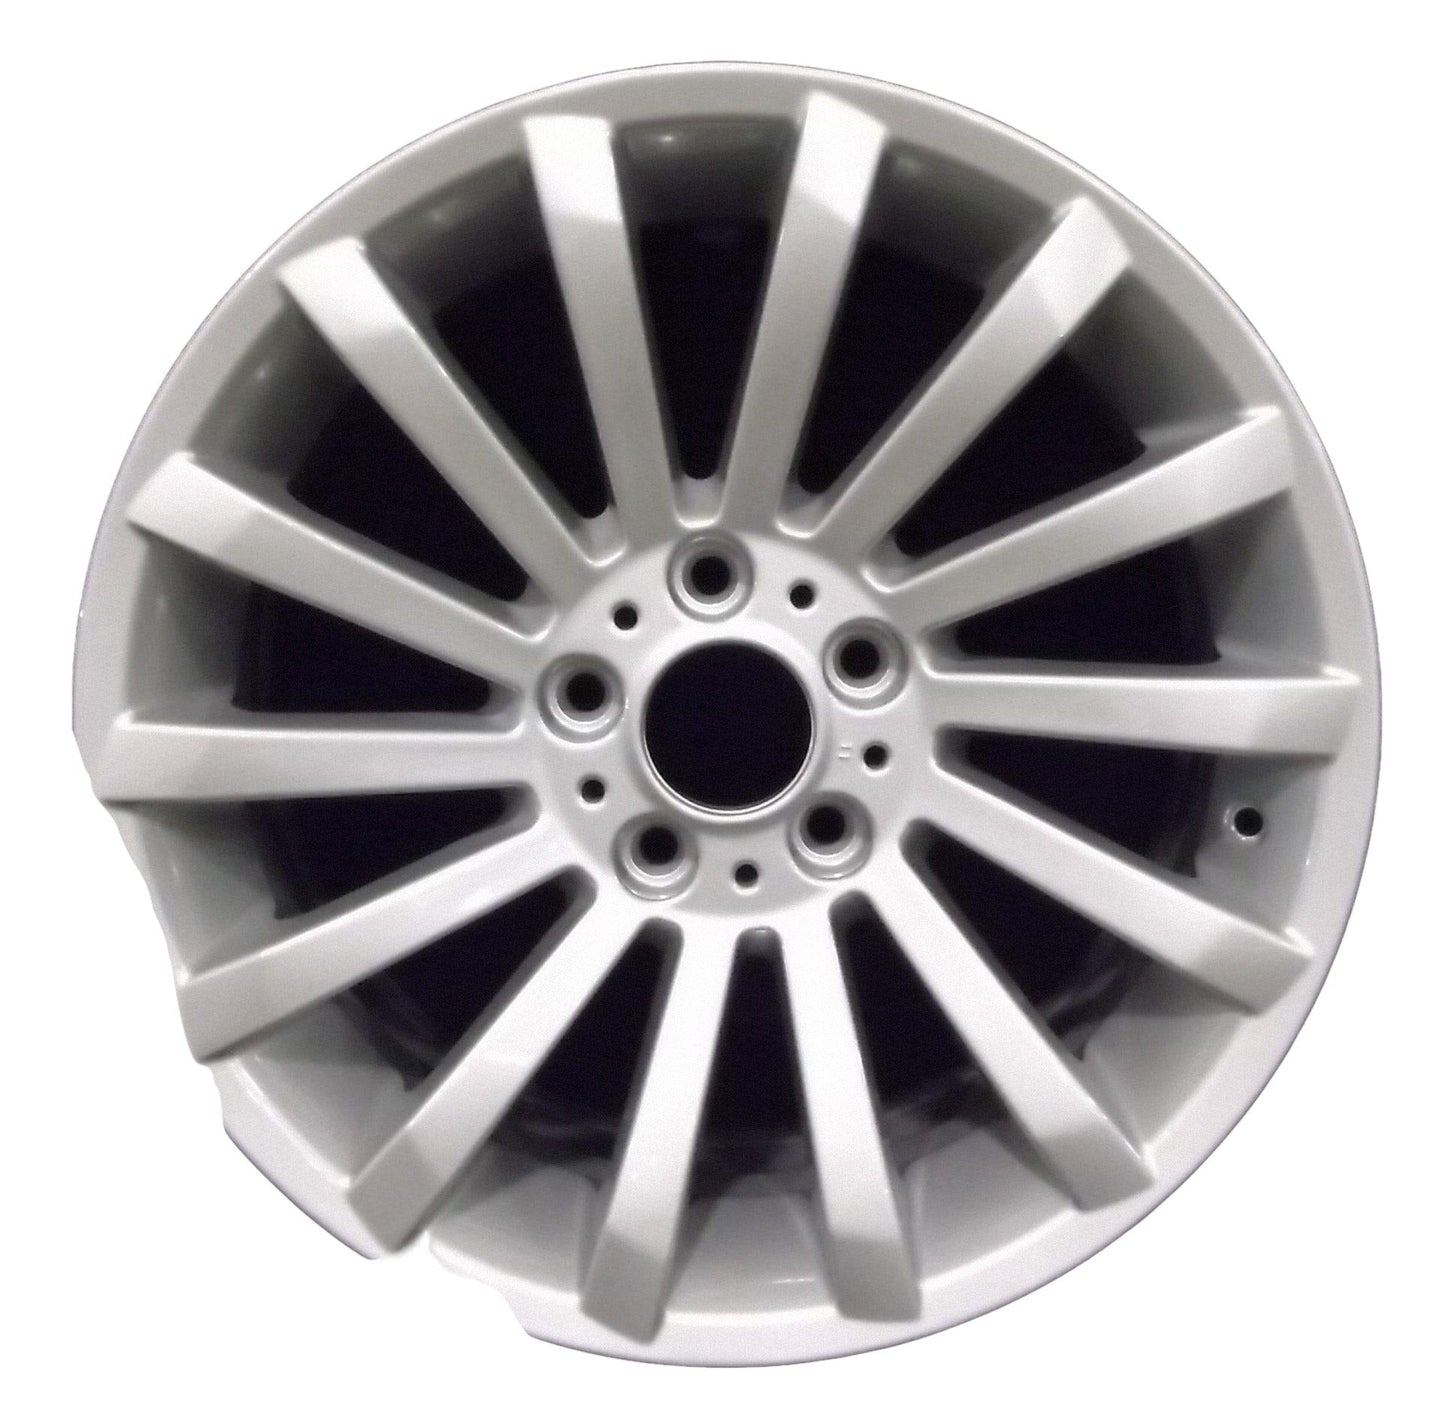 BMW 323i  2006, 2007, 2008, 2009, 2010, 2011 Factory OEM Car Wheel Size 18x8 Alloy WAO.59596FT.PS10.FF